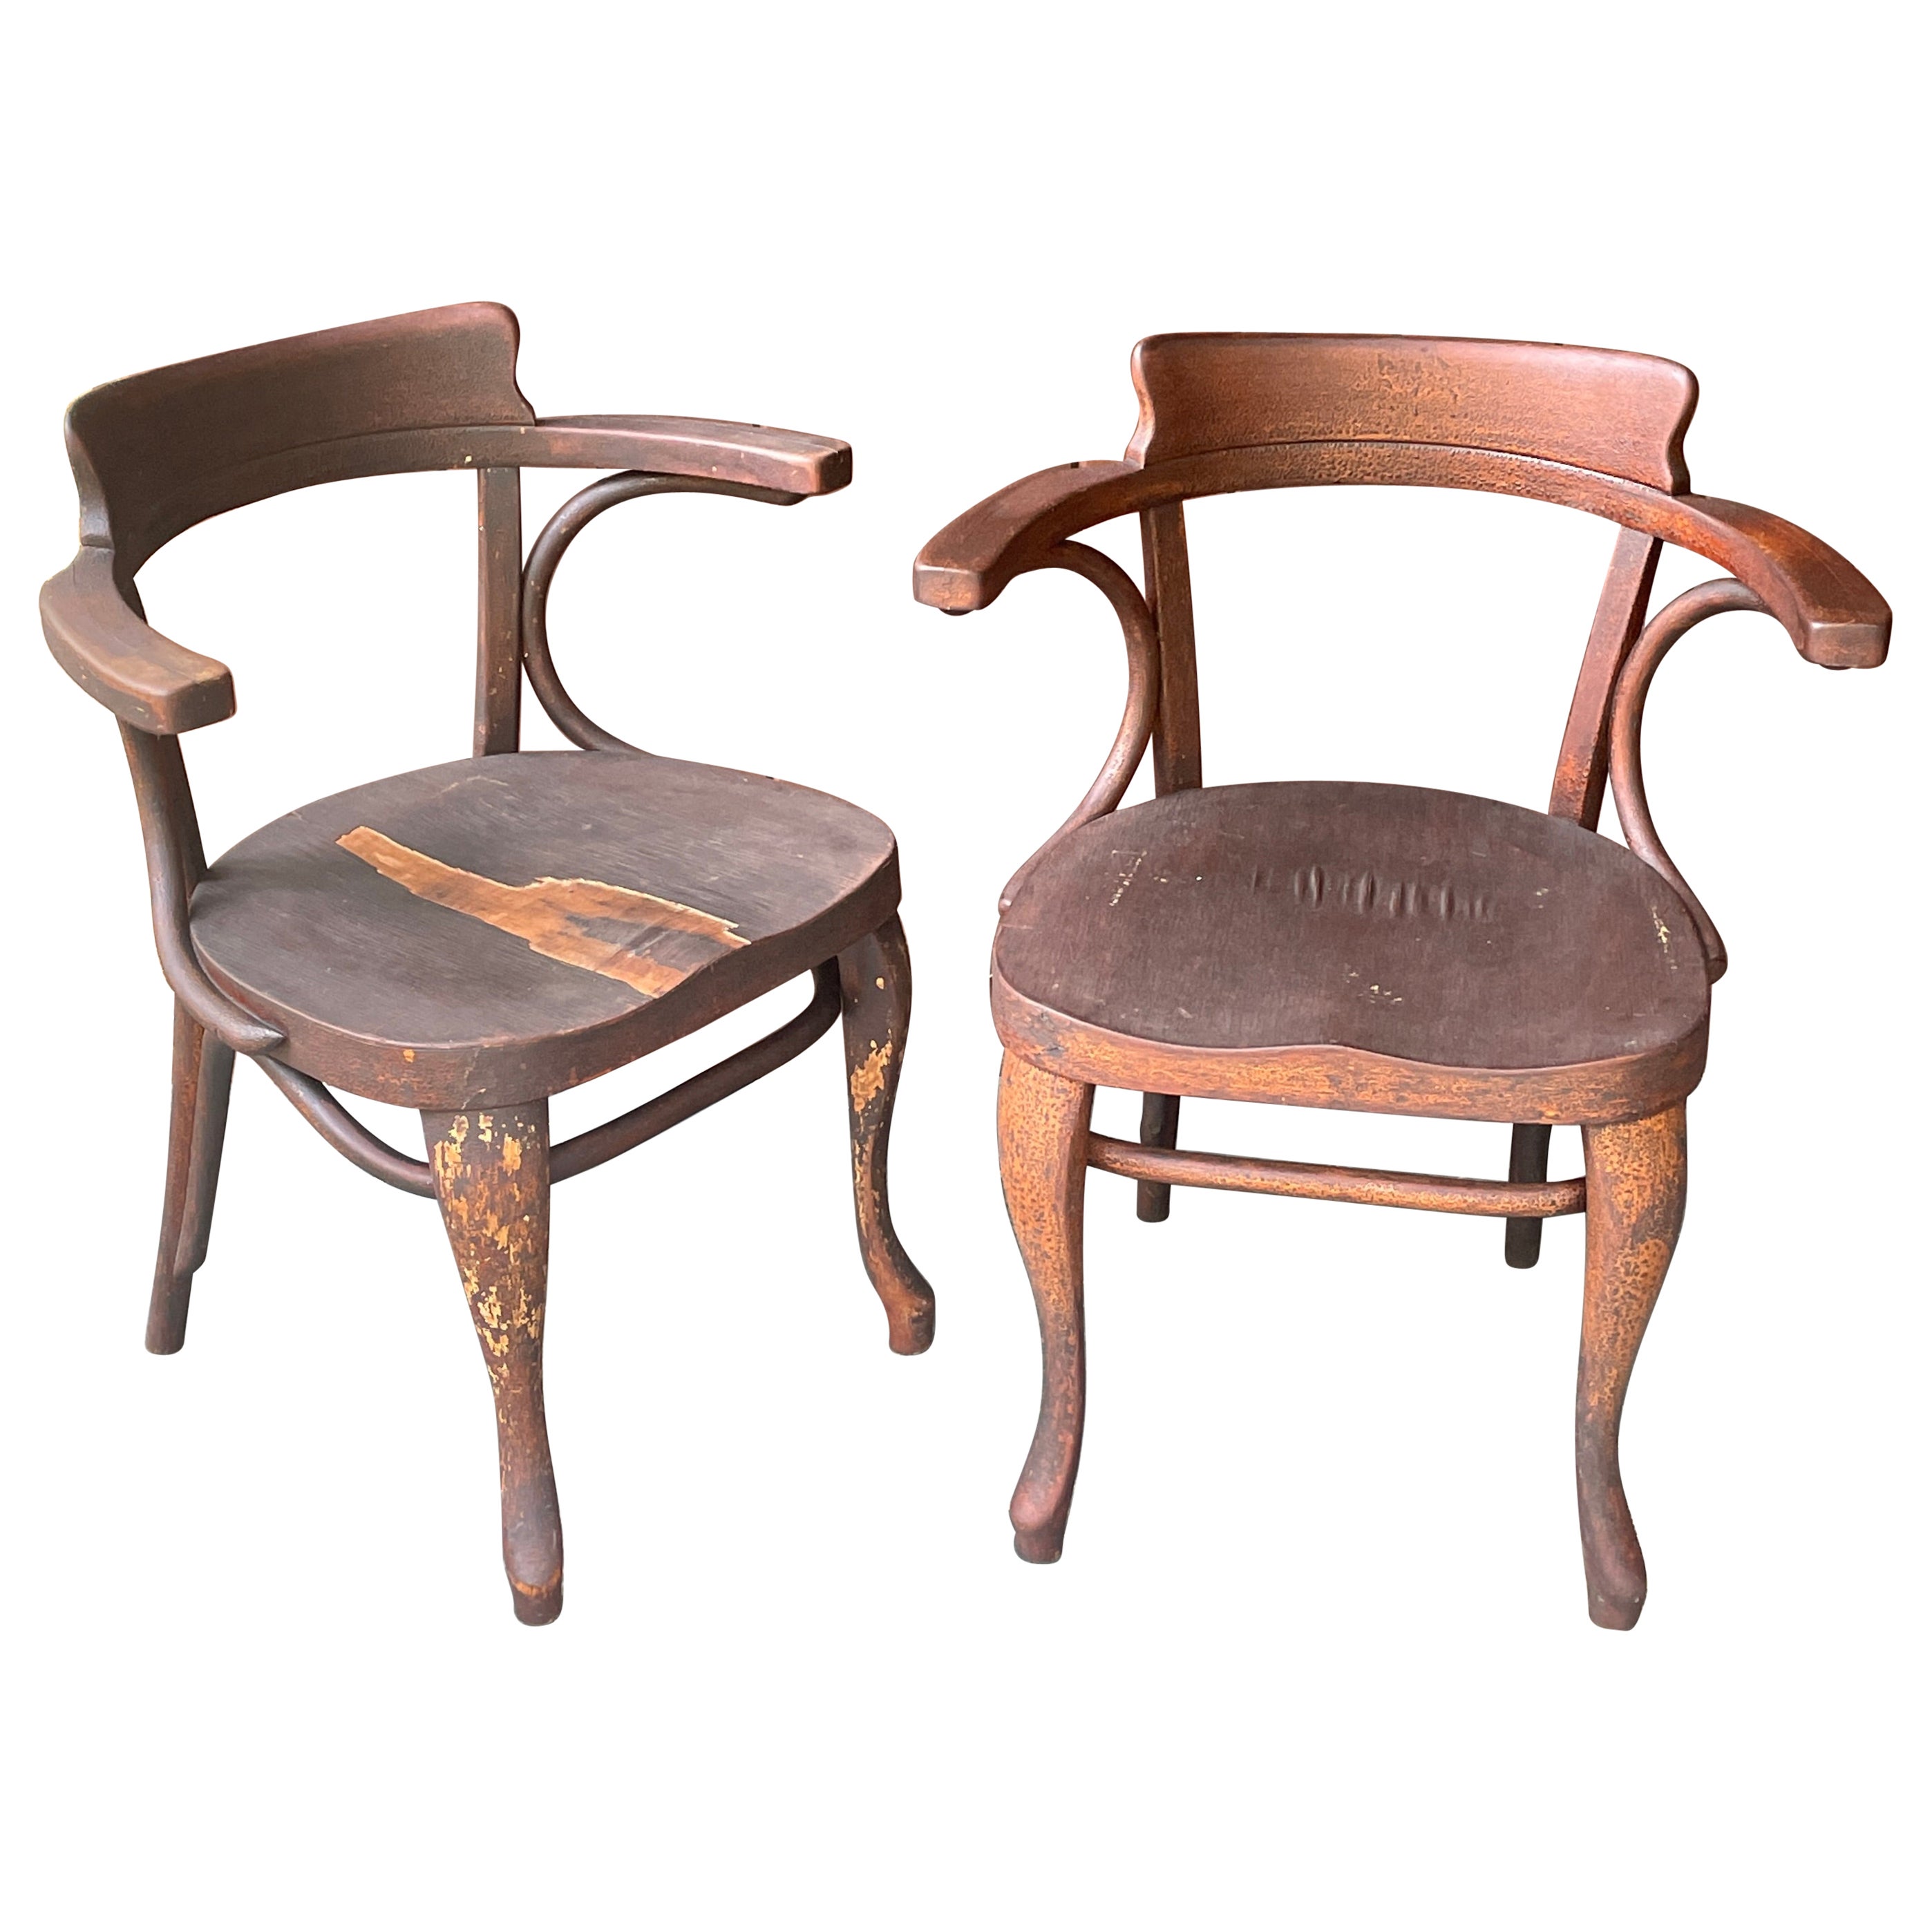 Early 20th Century Viennese Cafe Chairs by Adolf Loos Thonet Austria